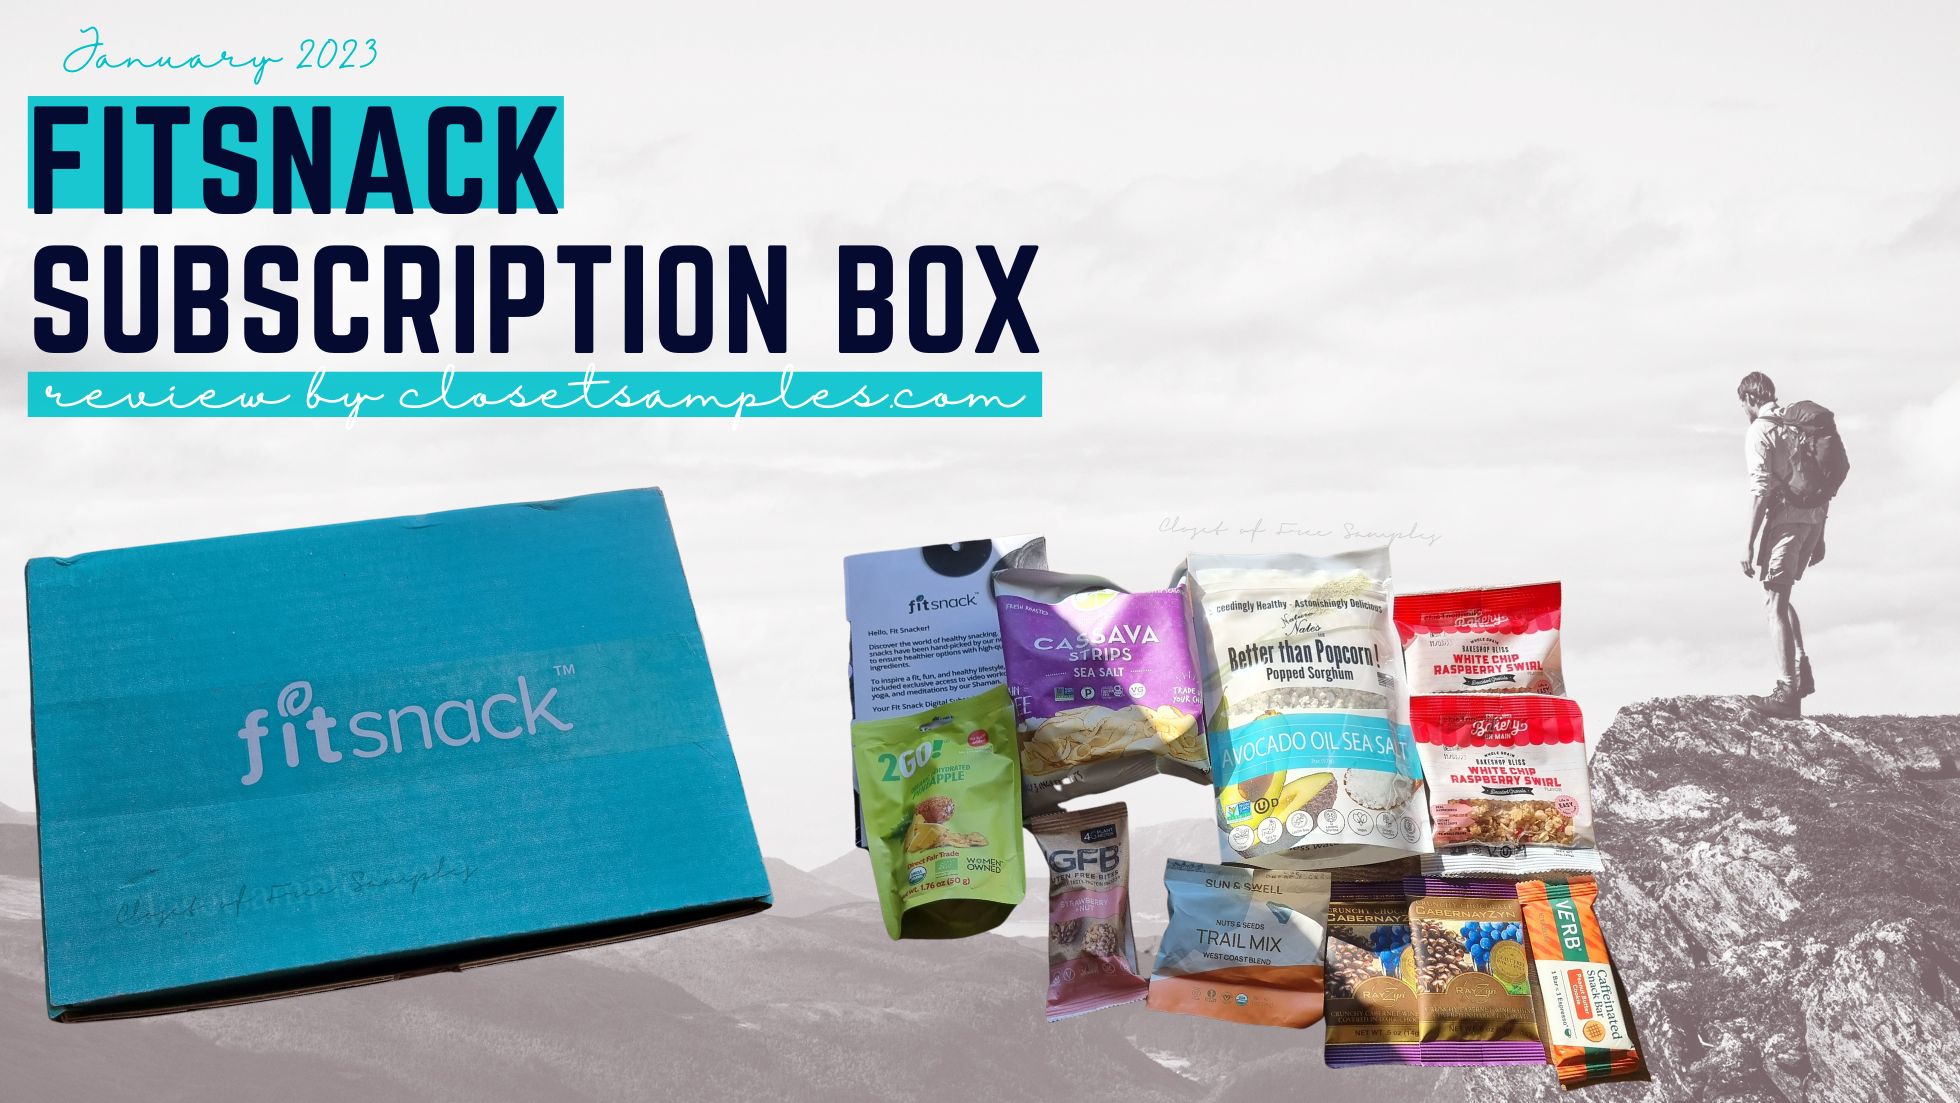 FitSnack Subscription Box january 2023 Review closetsamples